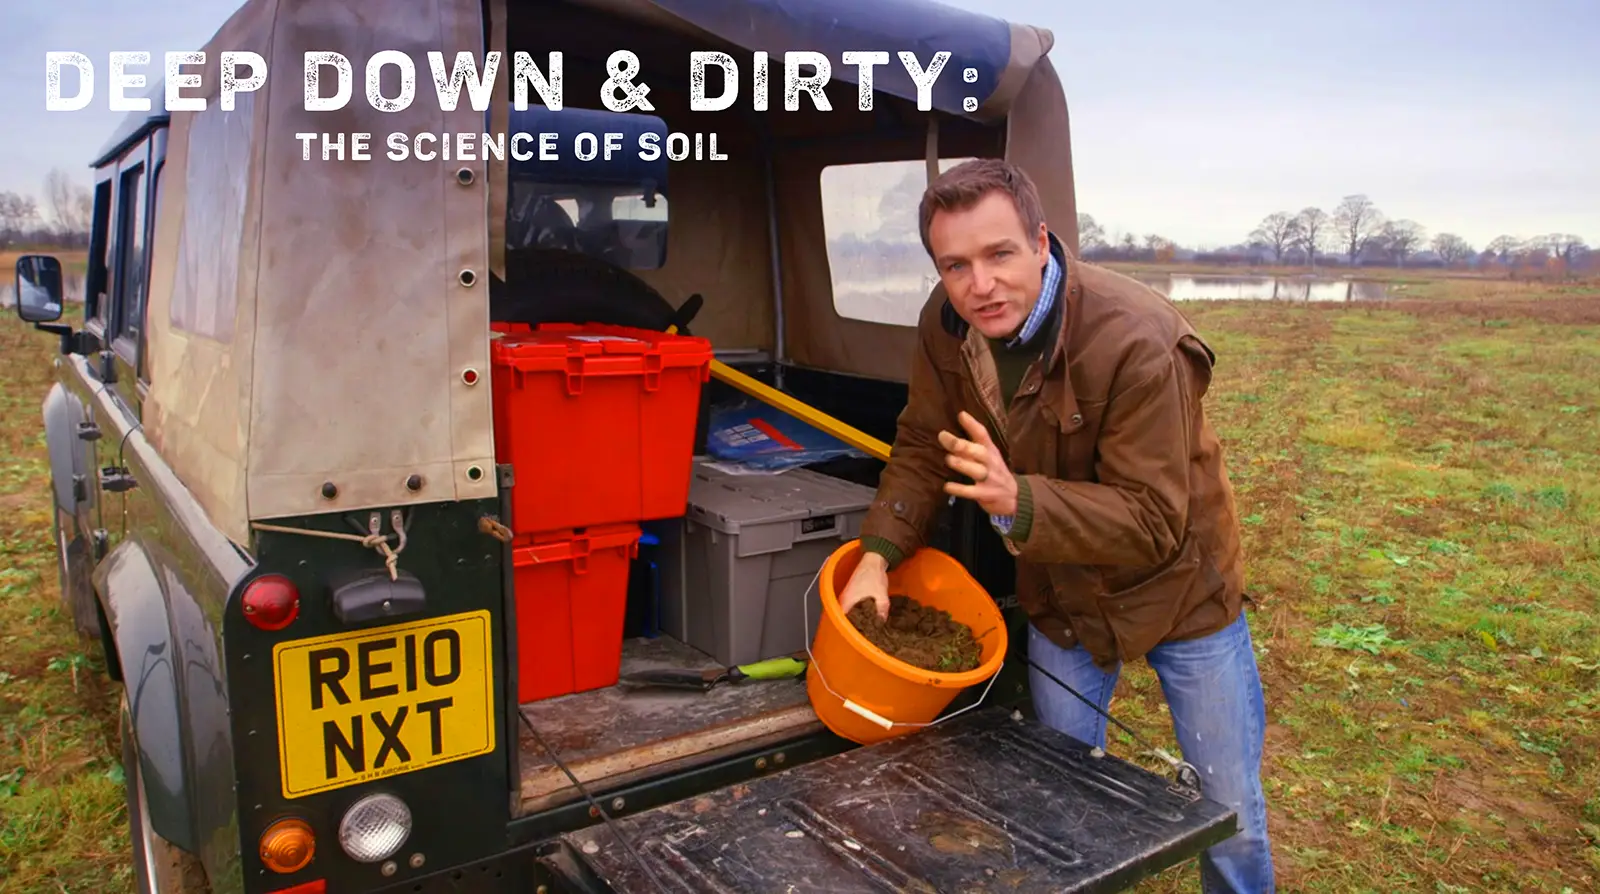 Deep Down & Dirty: The Science of Soil